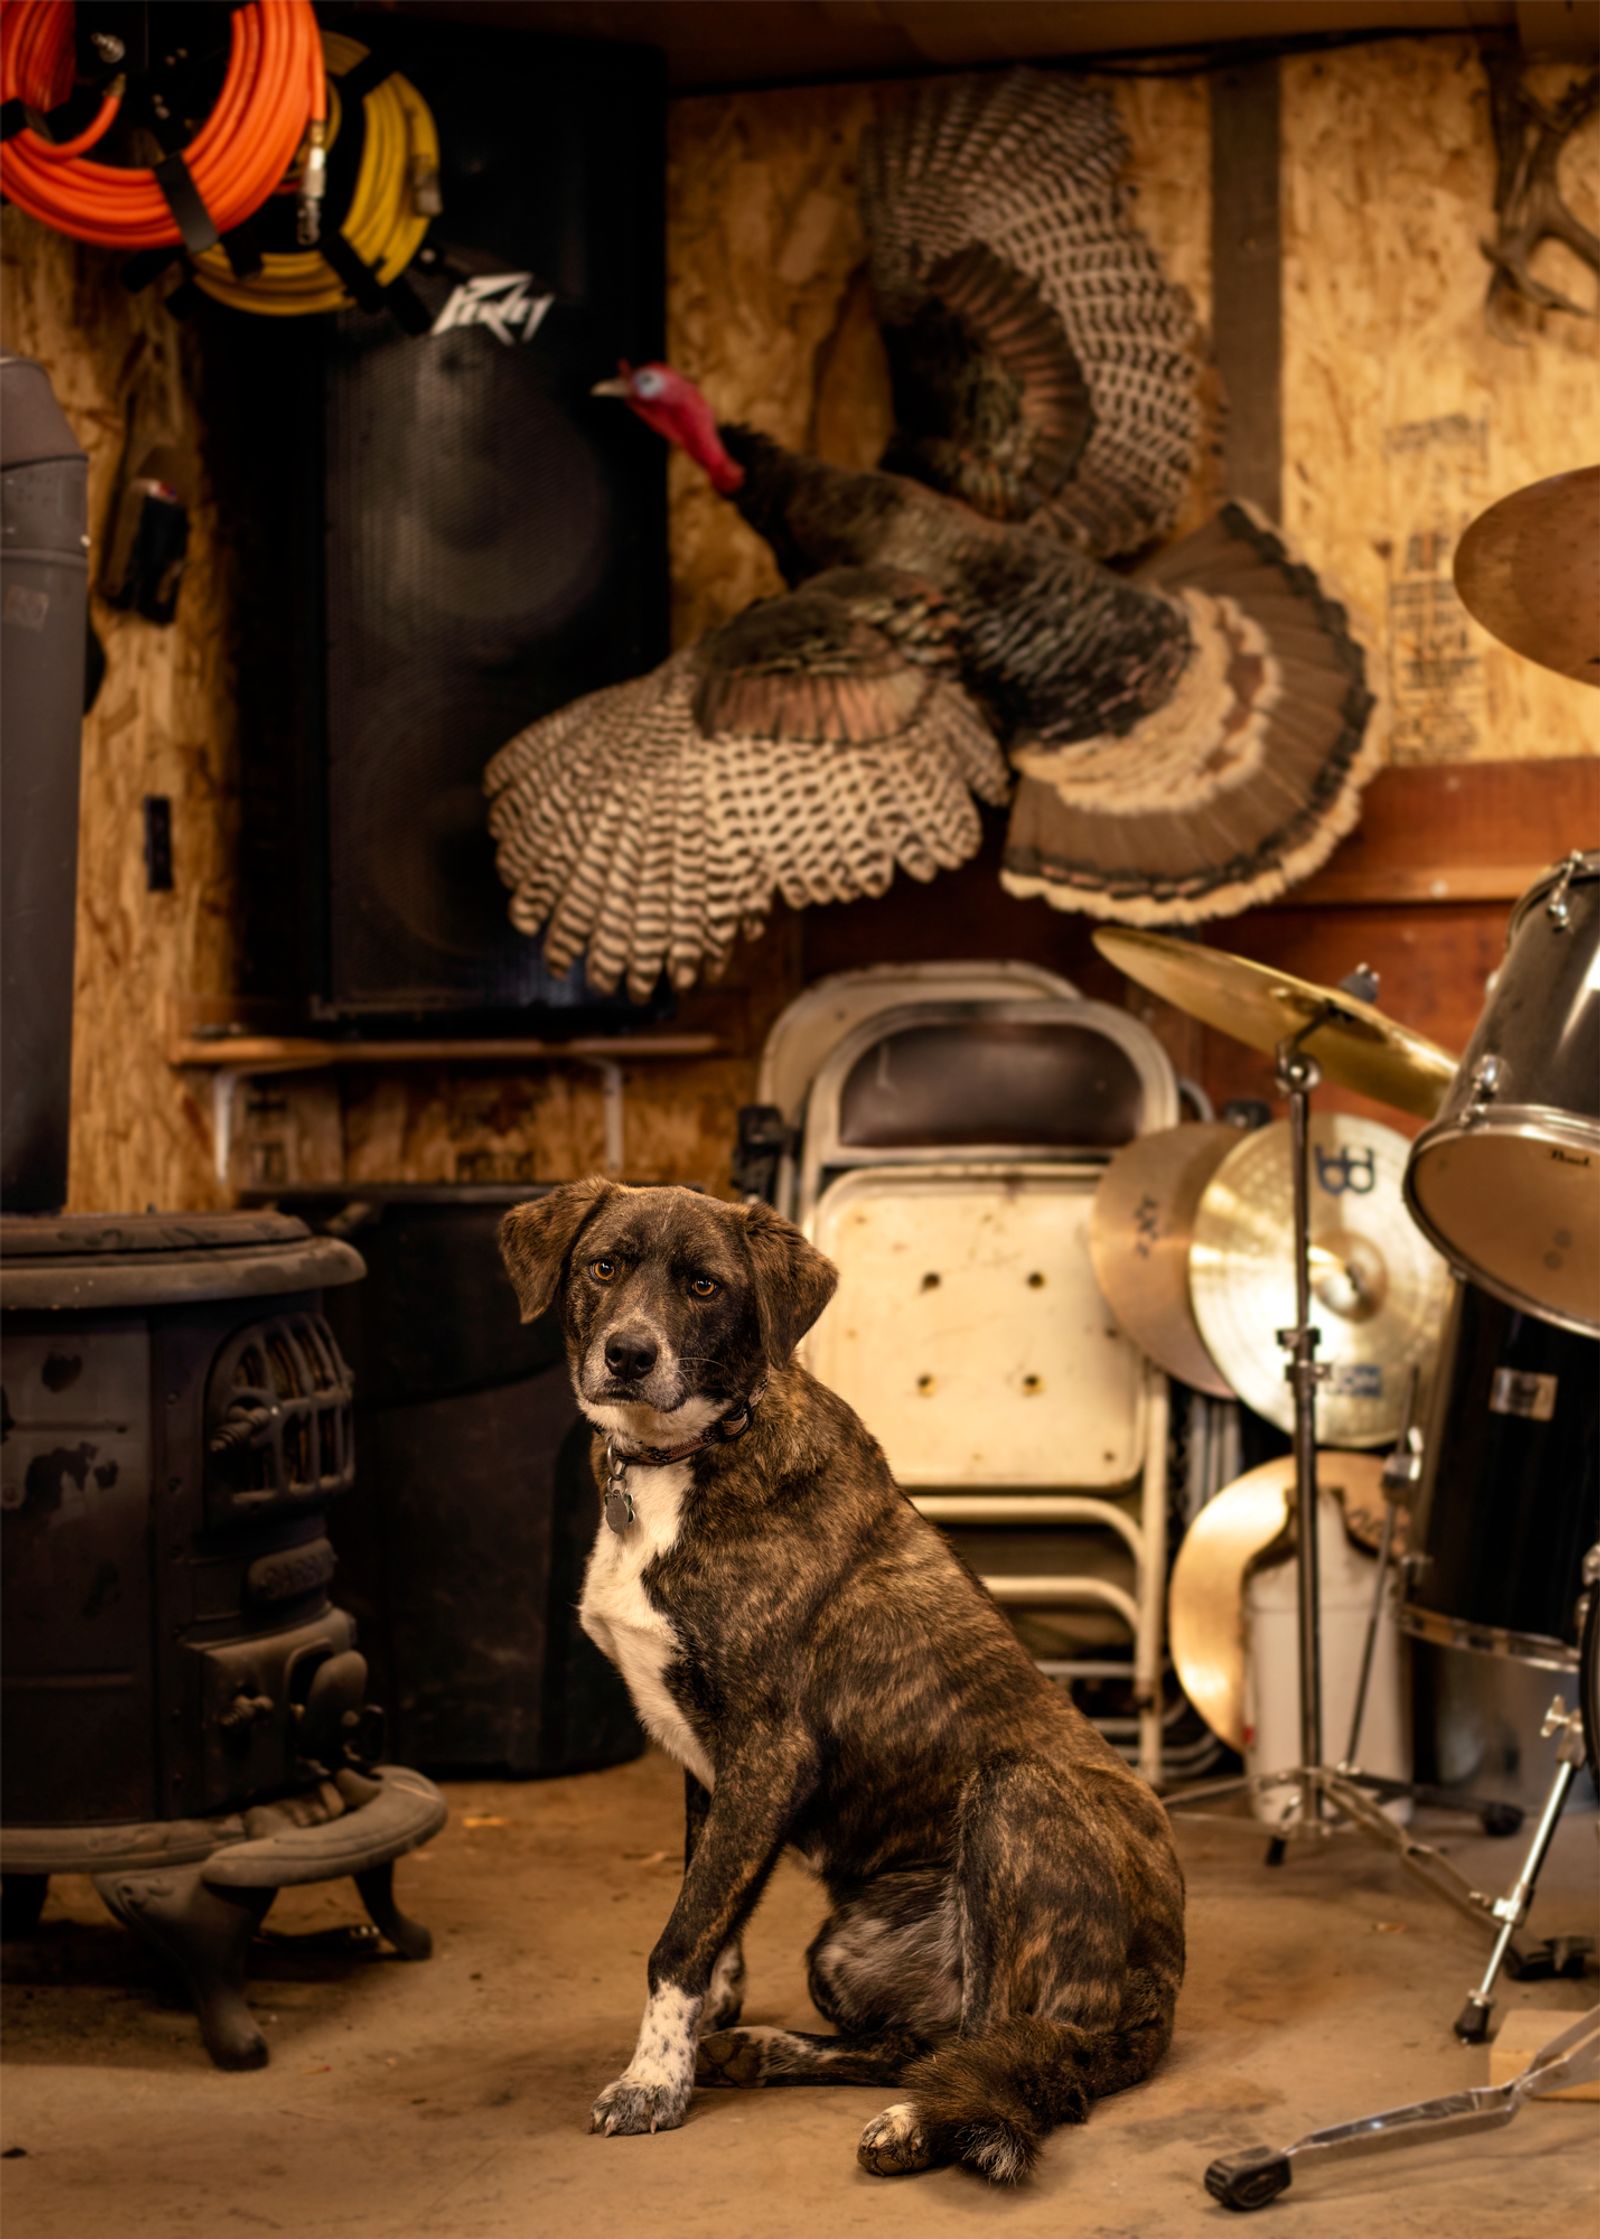 © Rosie Day - Dio the dog in Josh’s taxidermy workshop and band practice space. Dufur, Oregon (Pop. 604)